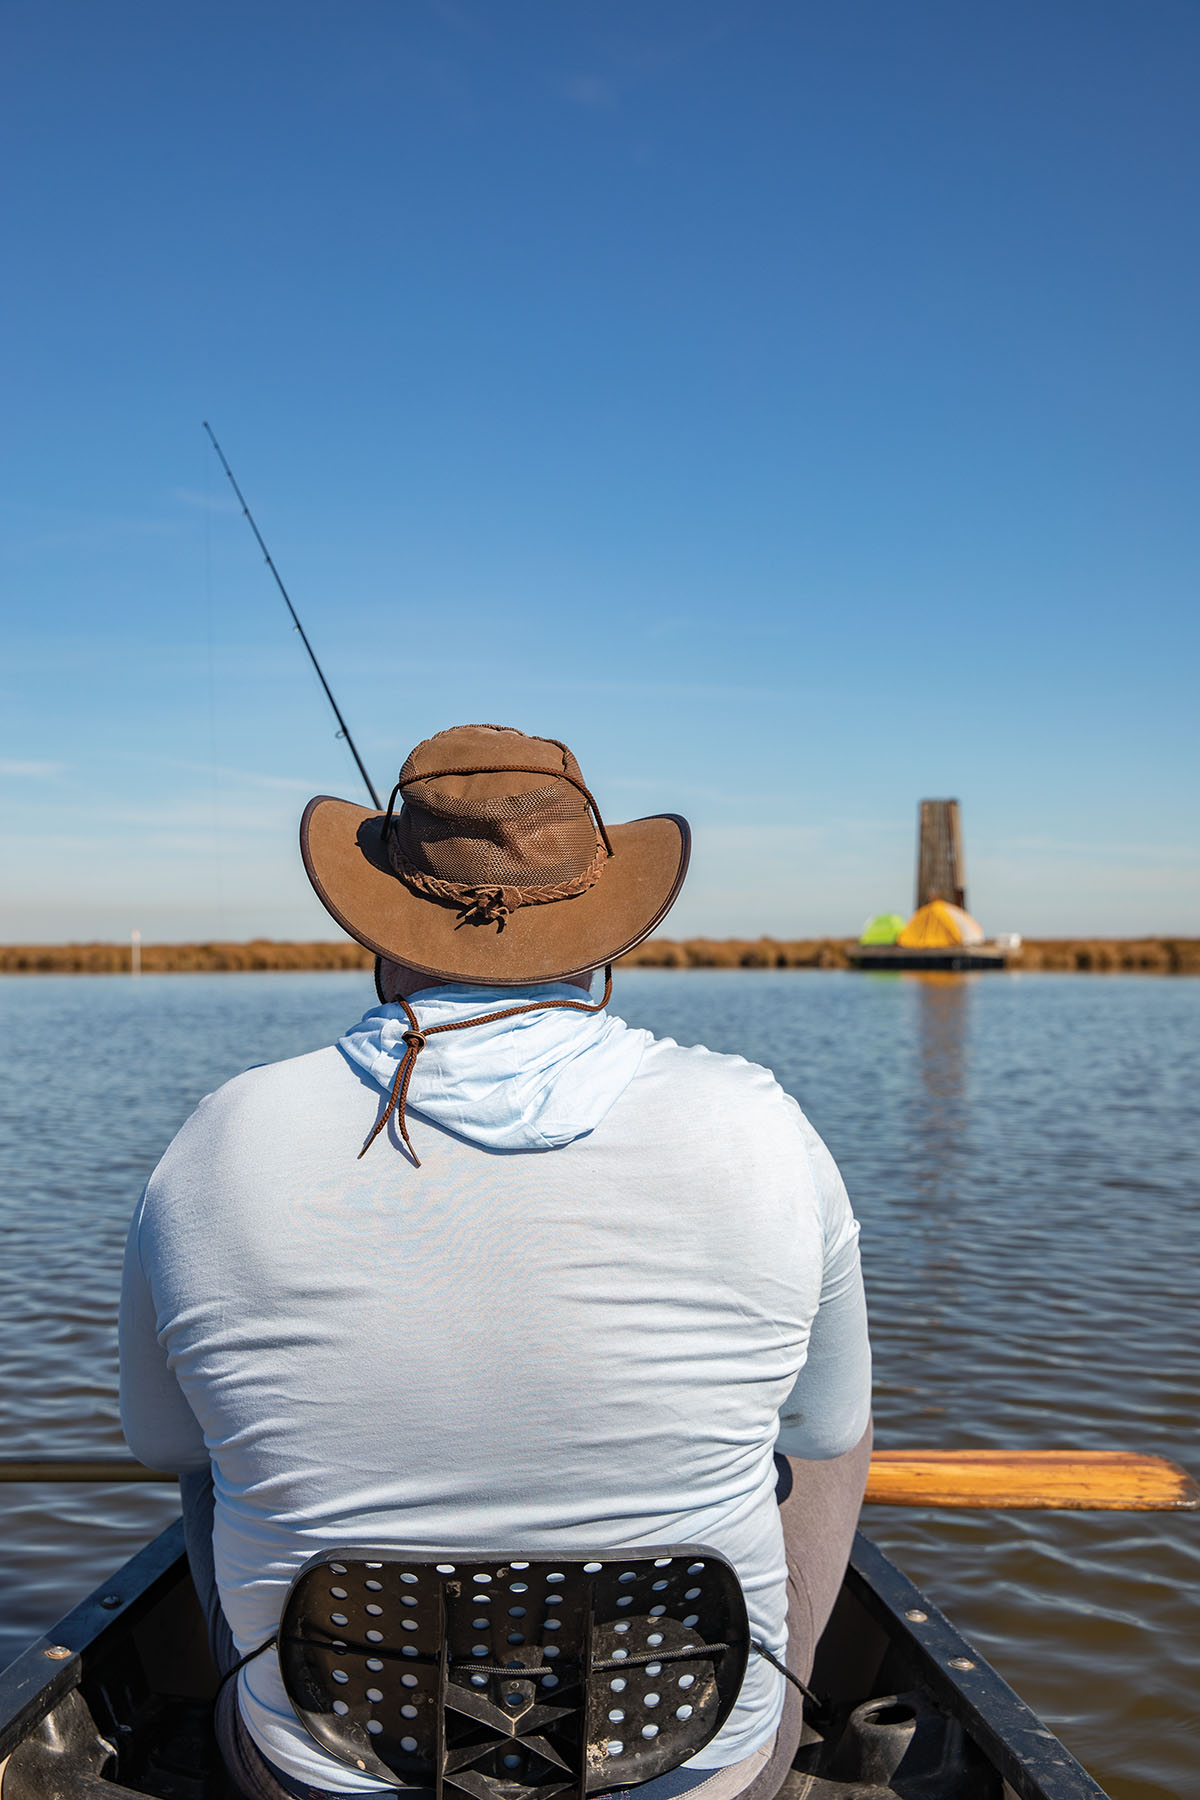 A person in a light blue shirt and brown hat casts a reel over a flat blue body of water with the floating tenpt pad in the distance